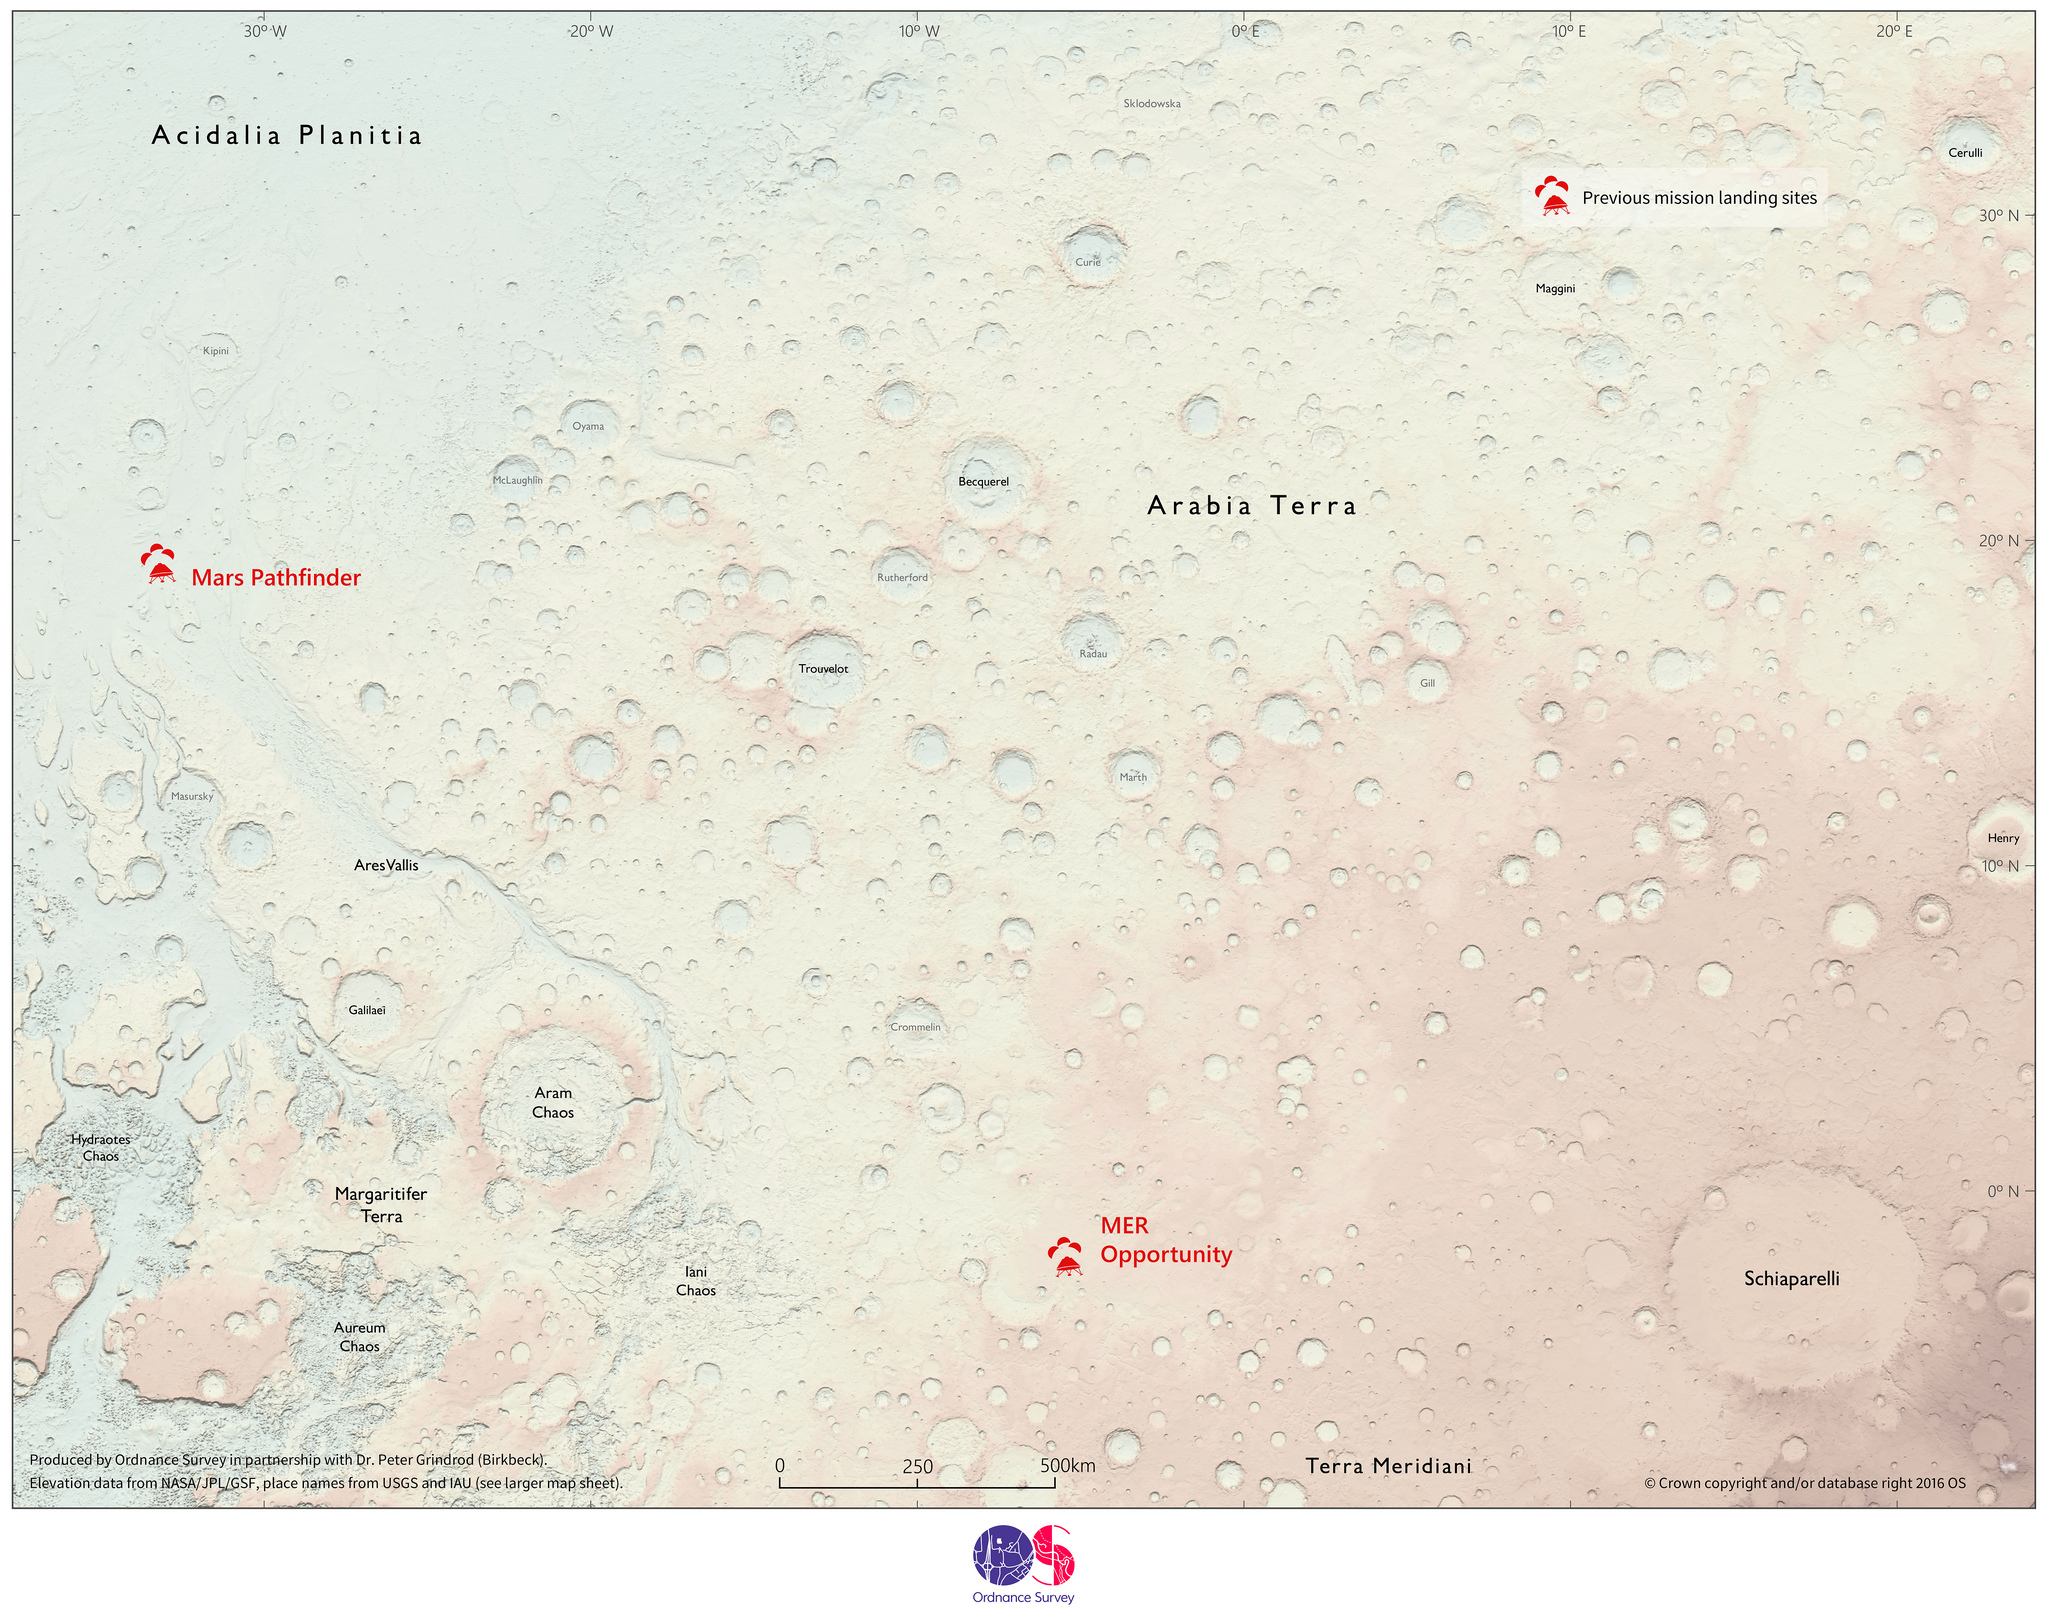 We Think These Martian Roadmaps Accidentally Revealed The Site Of An Upcoming Mars Landing